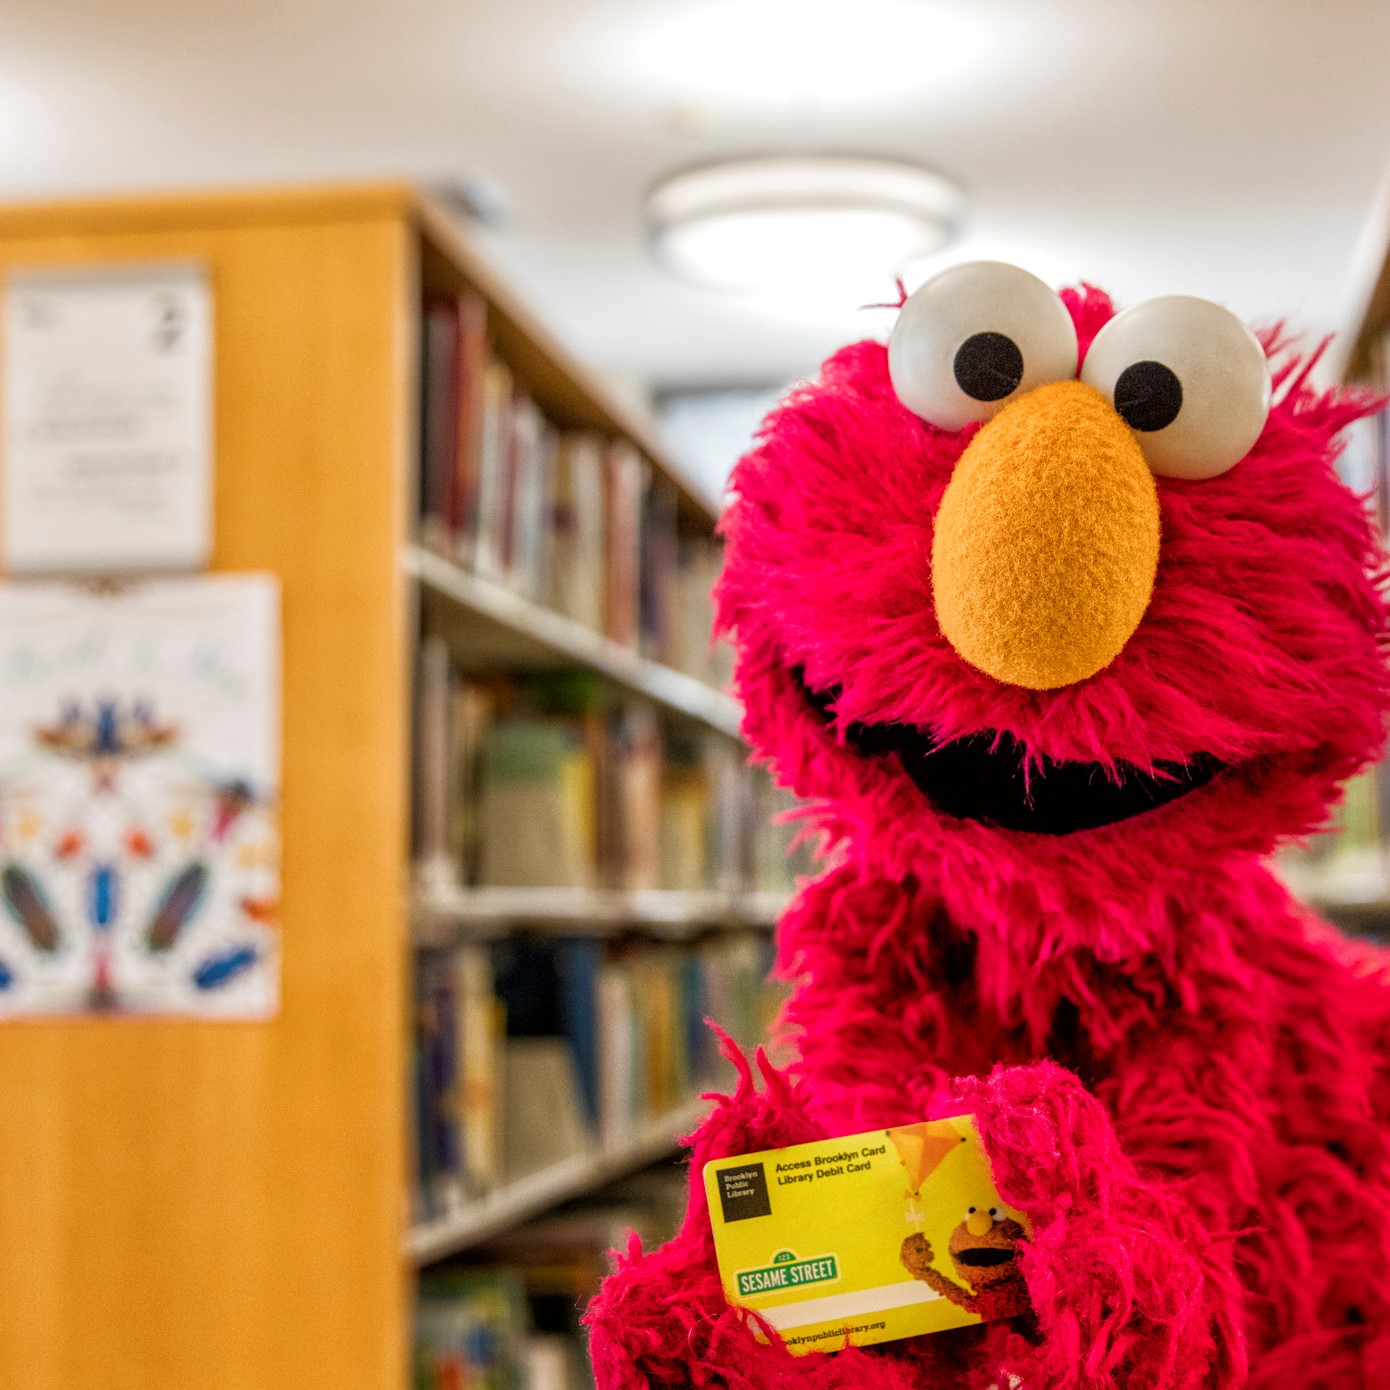 mount Caius Uregelmæssigheder Elmo on Twitter: "Elmo has Elmo's very own library card! Elmo feels so  special! ❤️ https://t.co/Sl2lby92H0" / Twitter